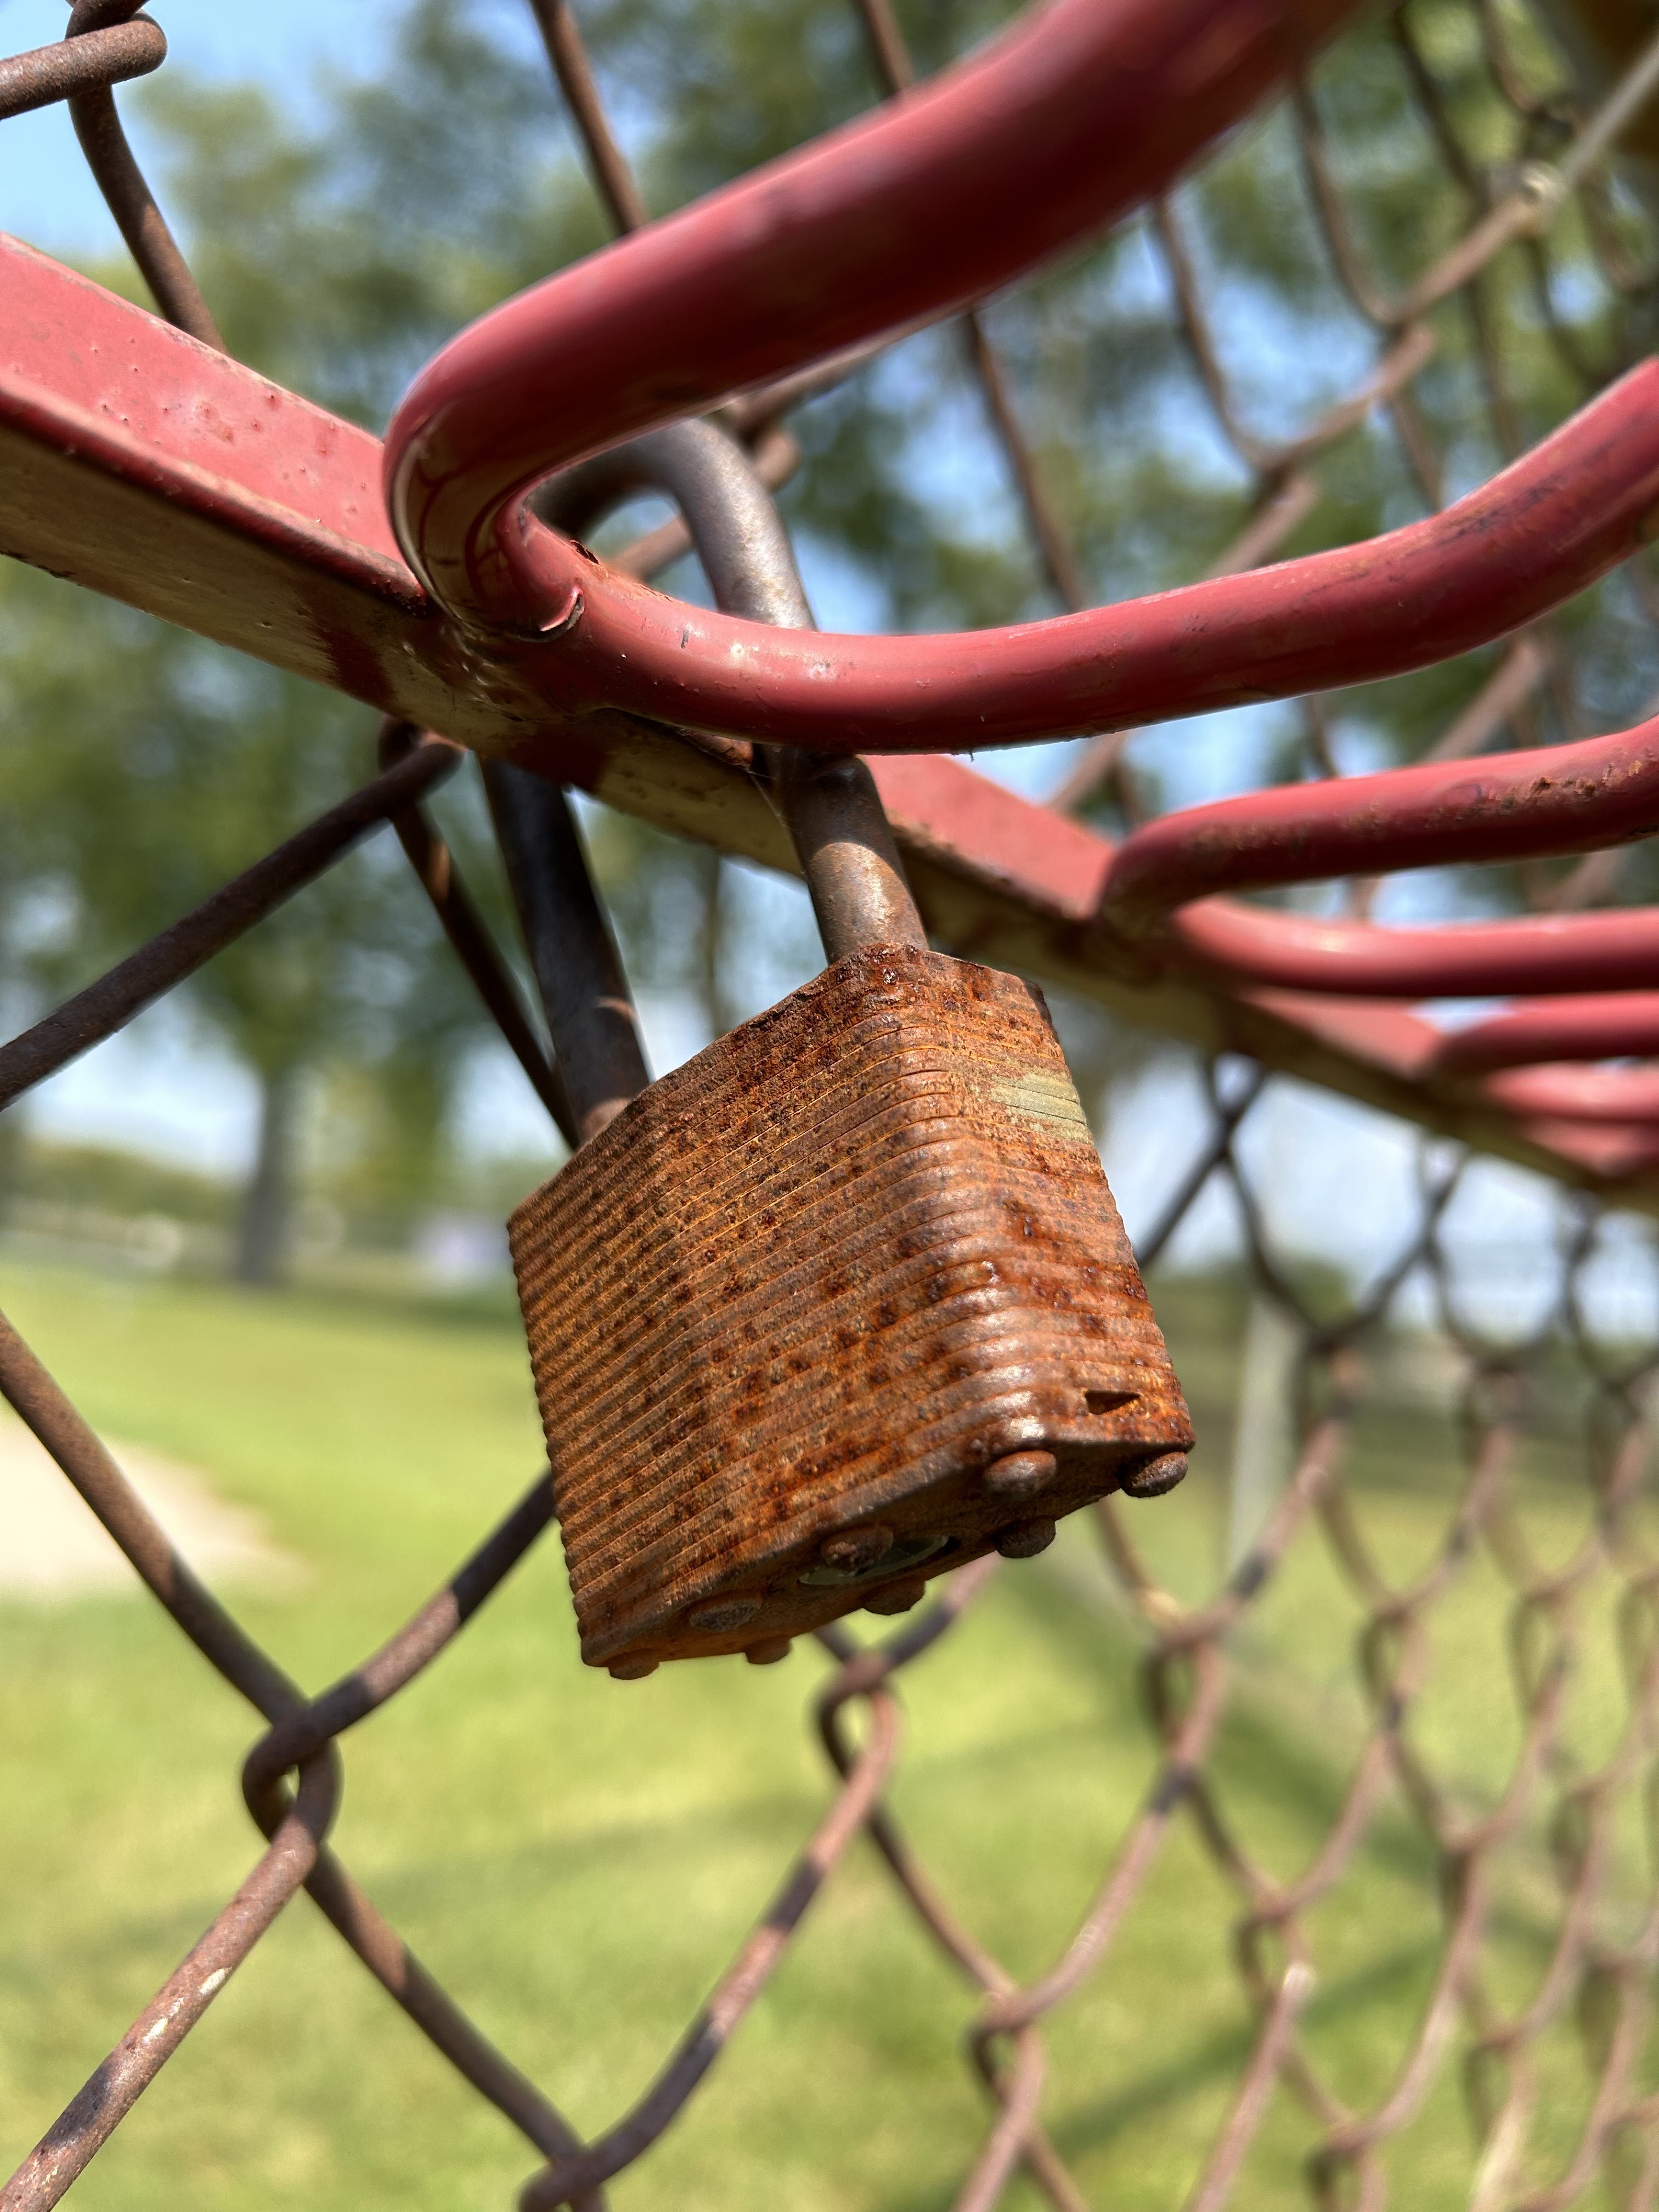 A photo of a rusty lock, taken with the iPhone 14.